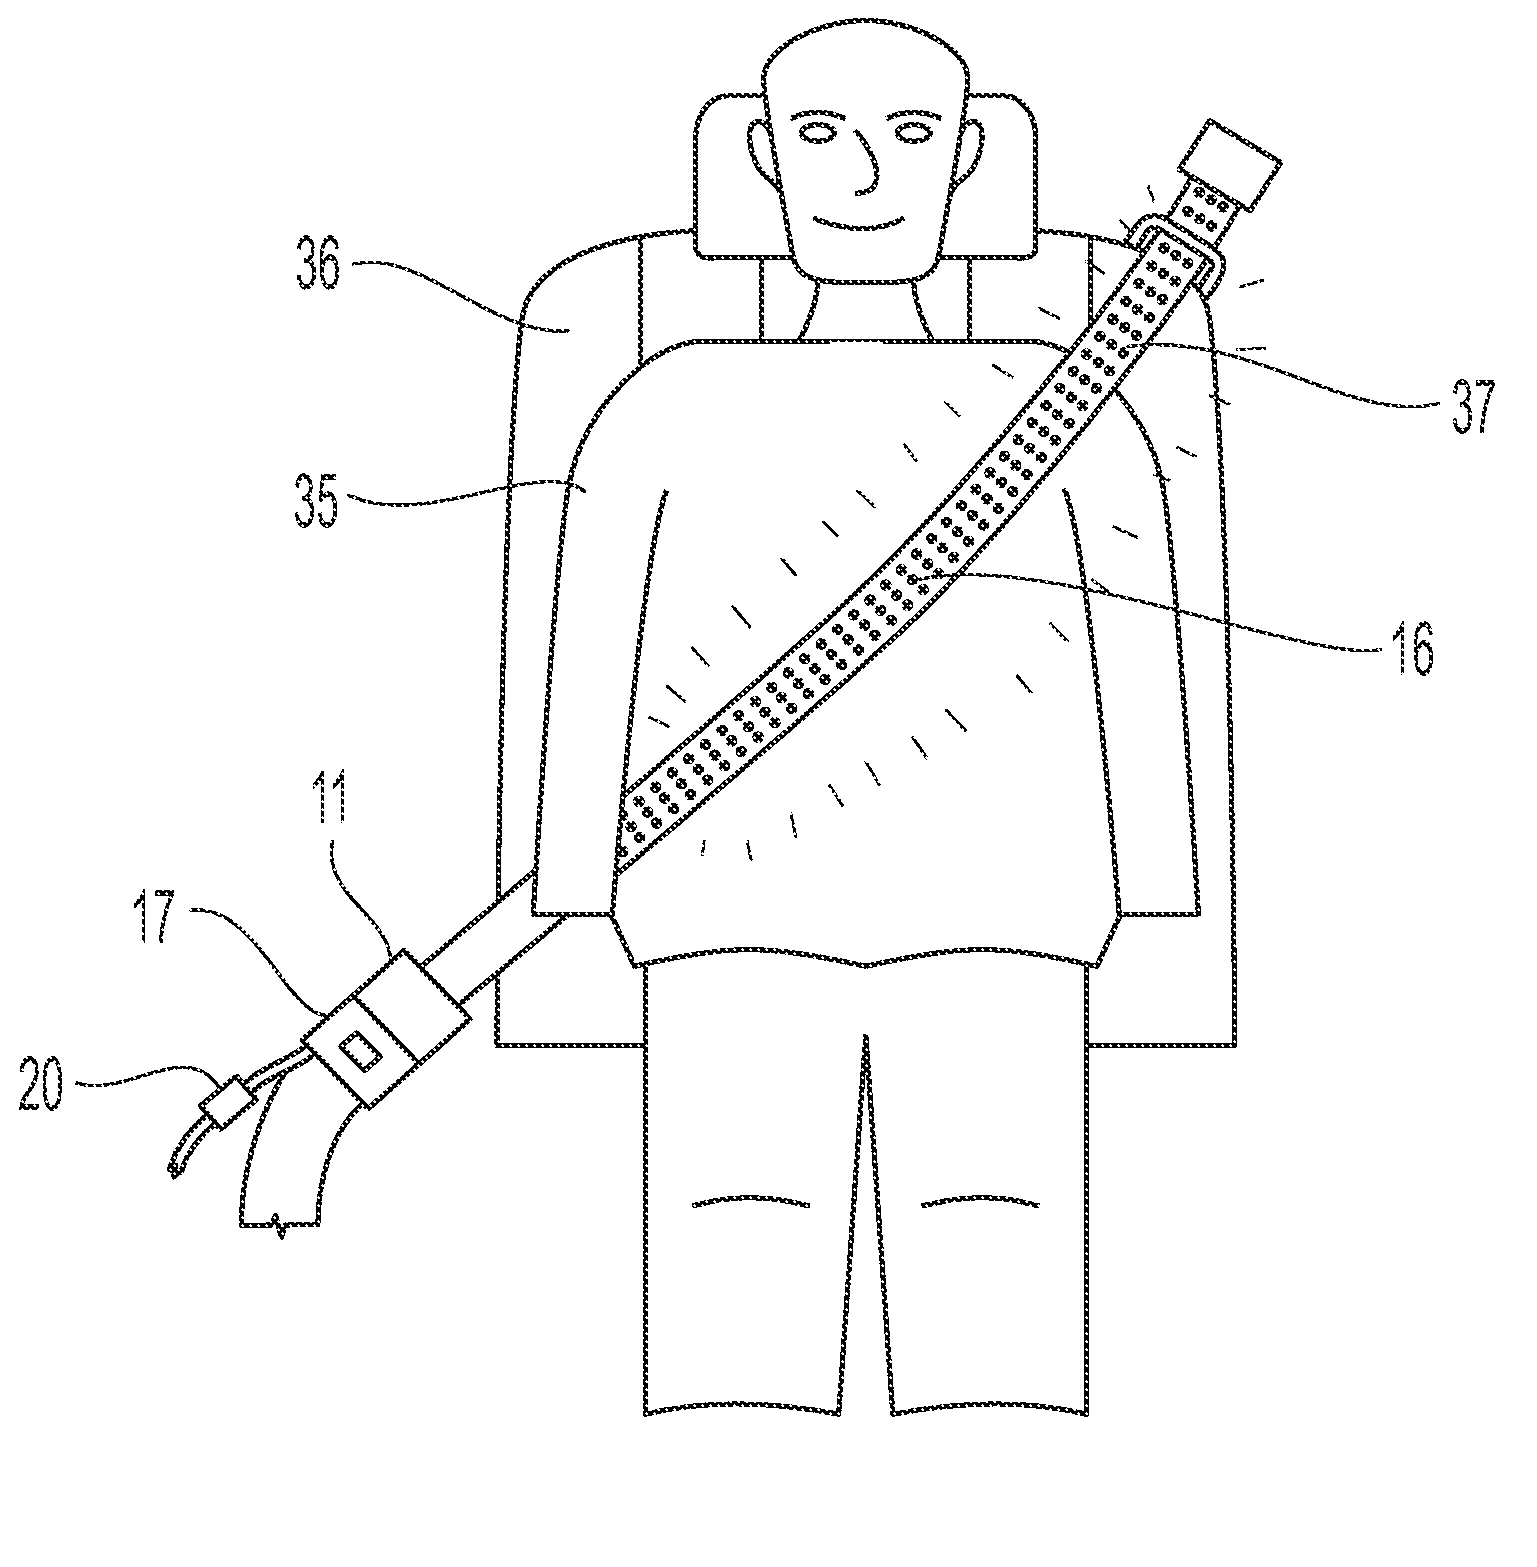 Apparatus and method for indicating seatbelt usage